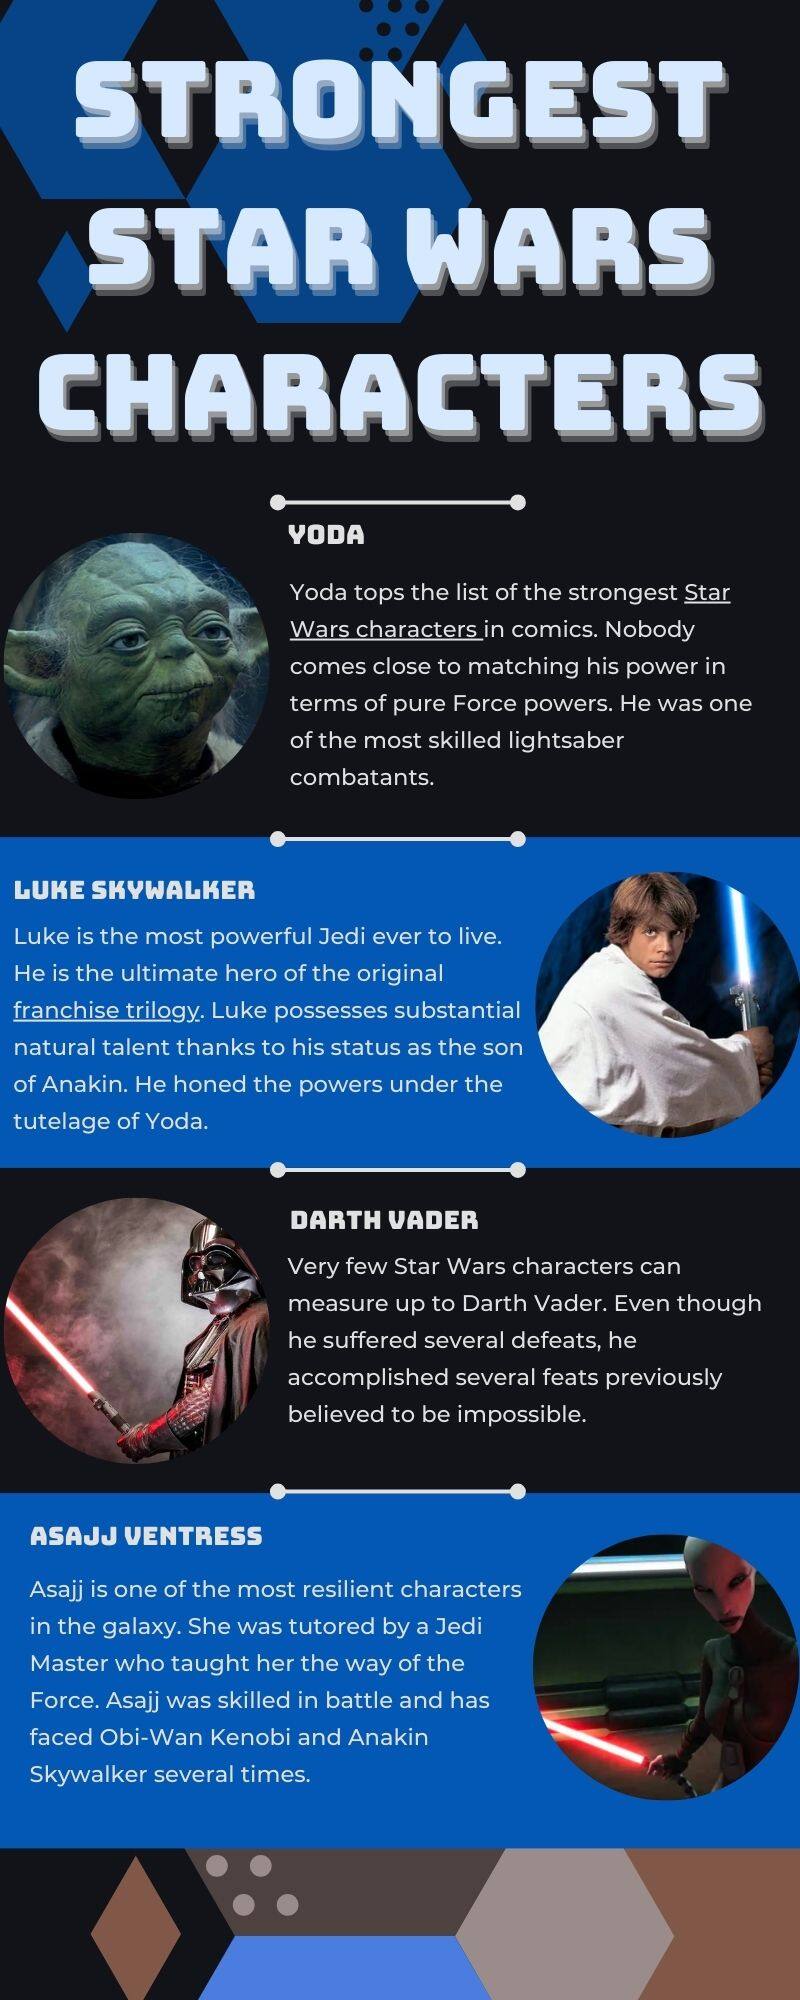 Strongest Star Wars characters